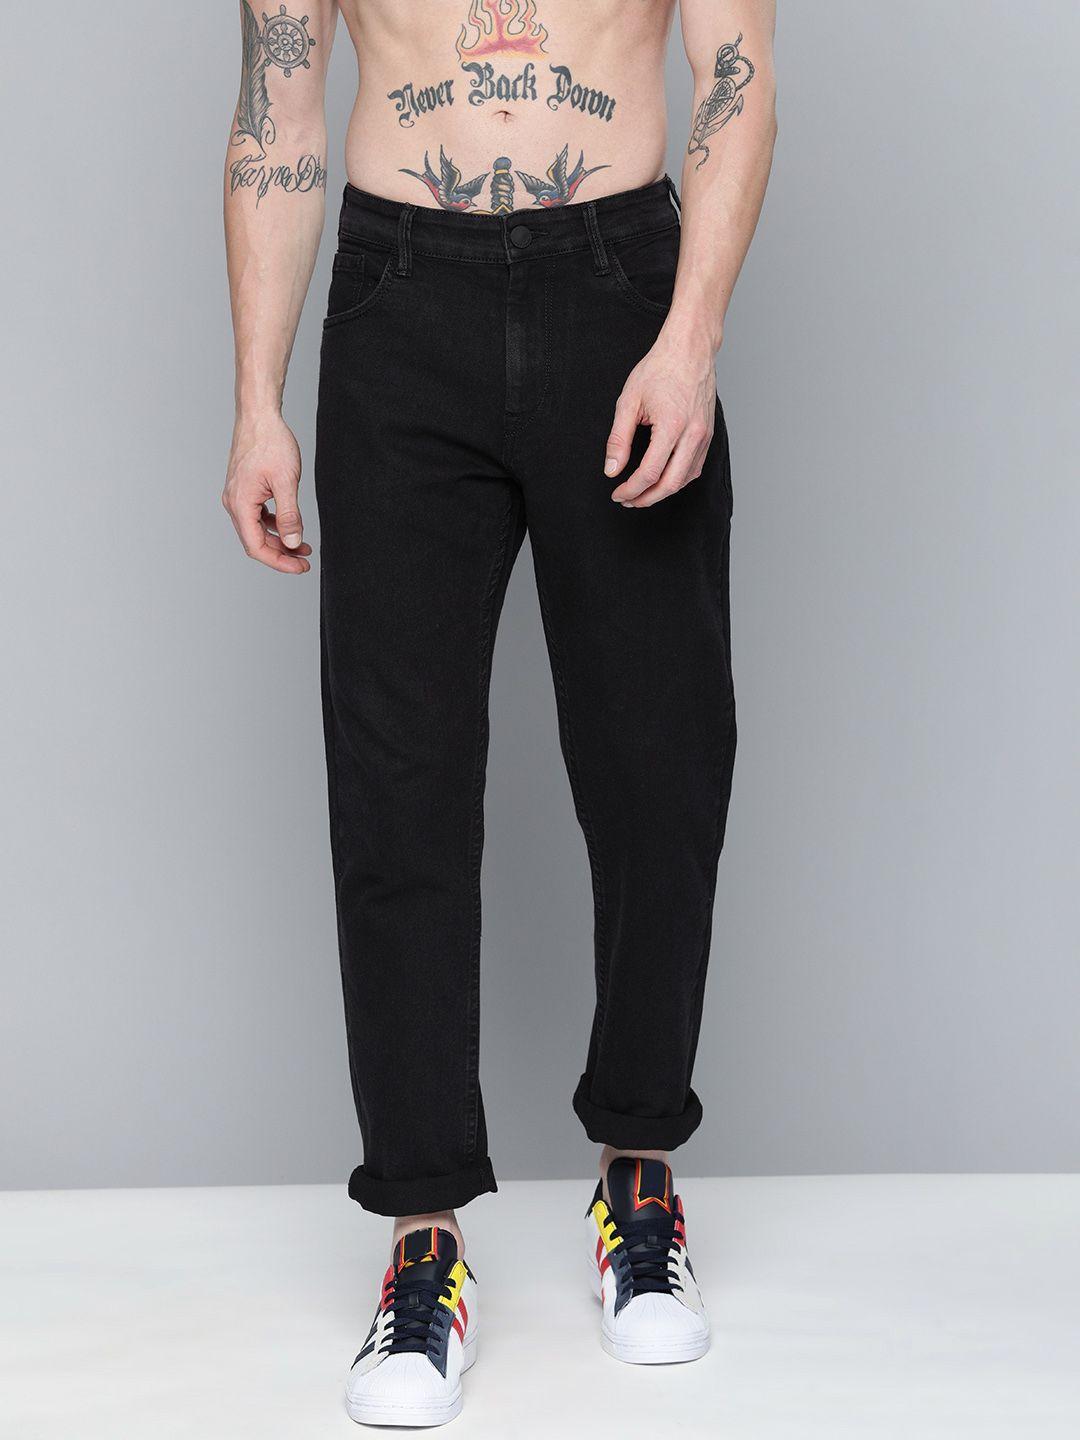 here&now men black slim fit clean look stretchable jeans